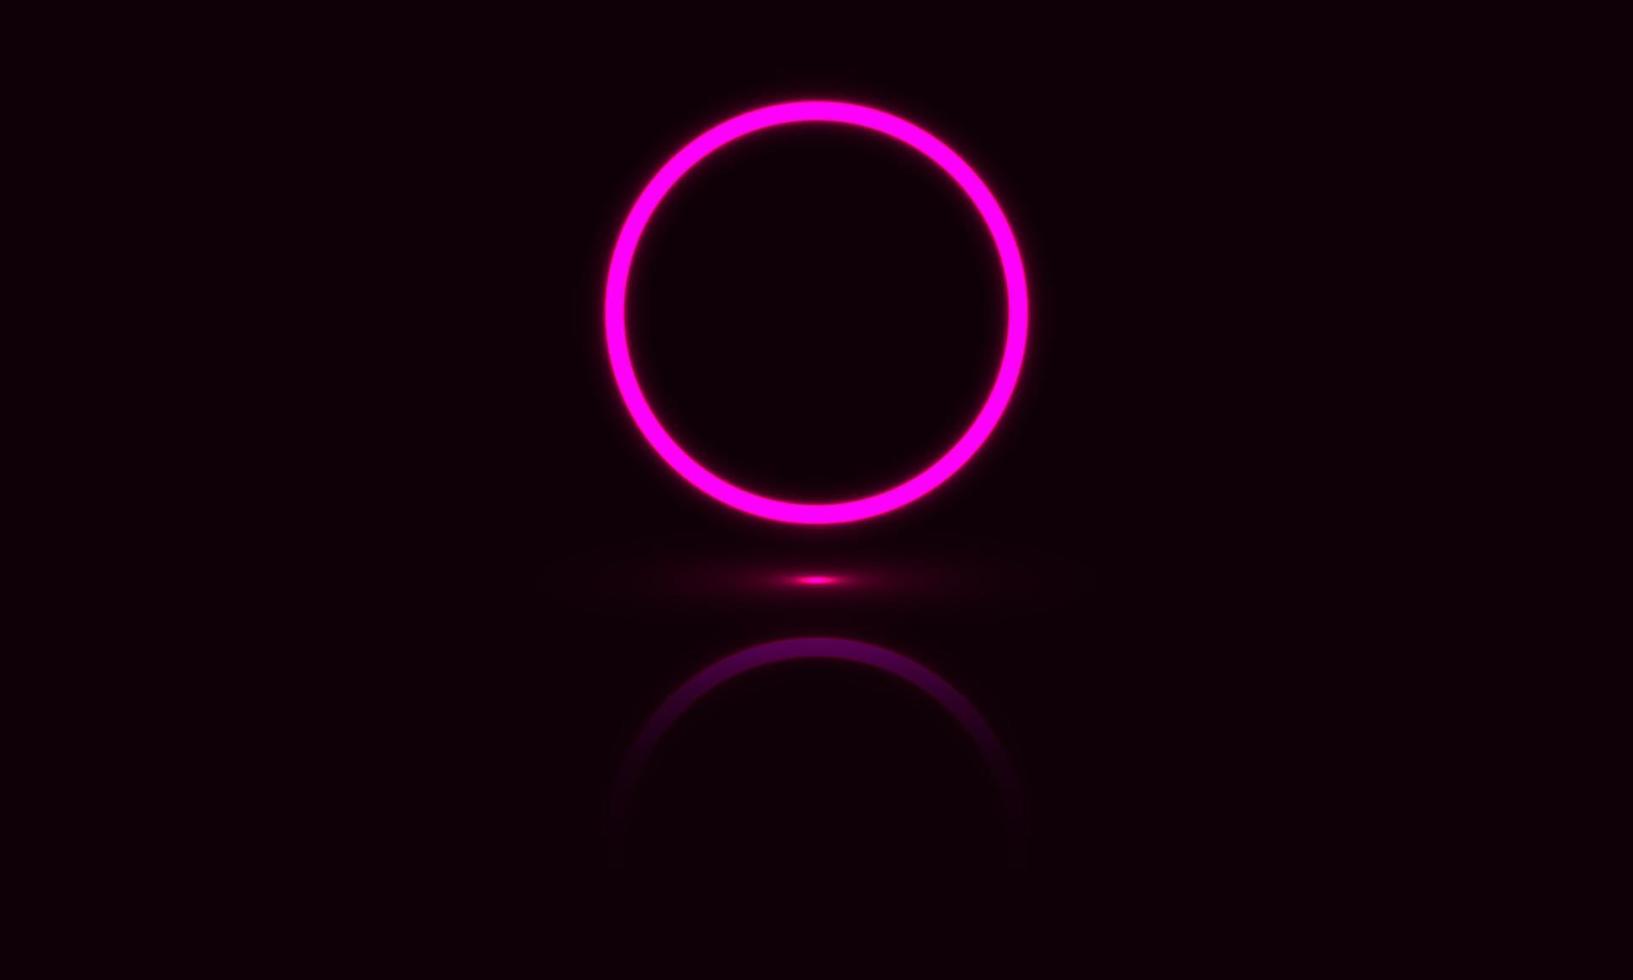 Futuristic Sci-Fi Abstract Neon Pink Light Shapes On Black Background. Exclusive wallpaper design for poster, brochure, presentation, website etc. vector